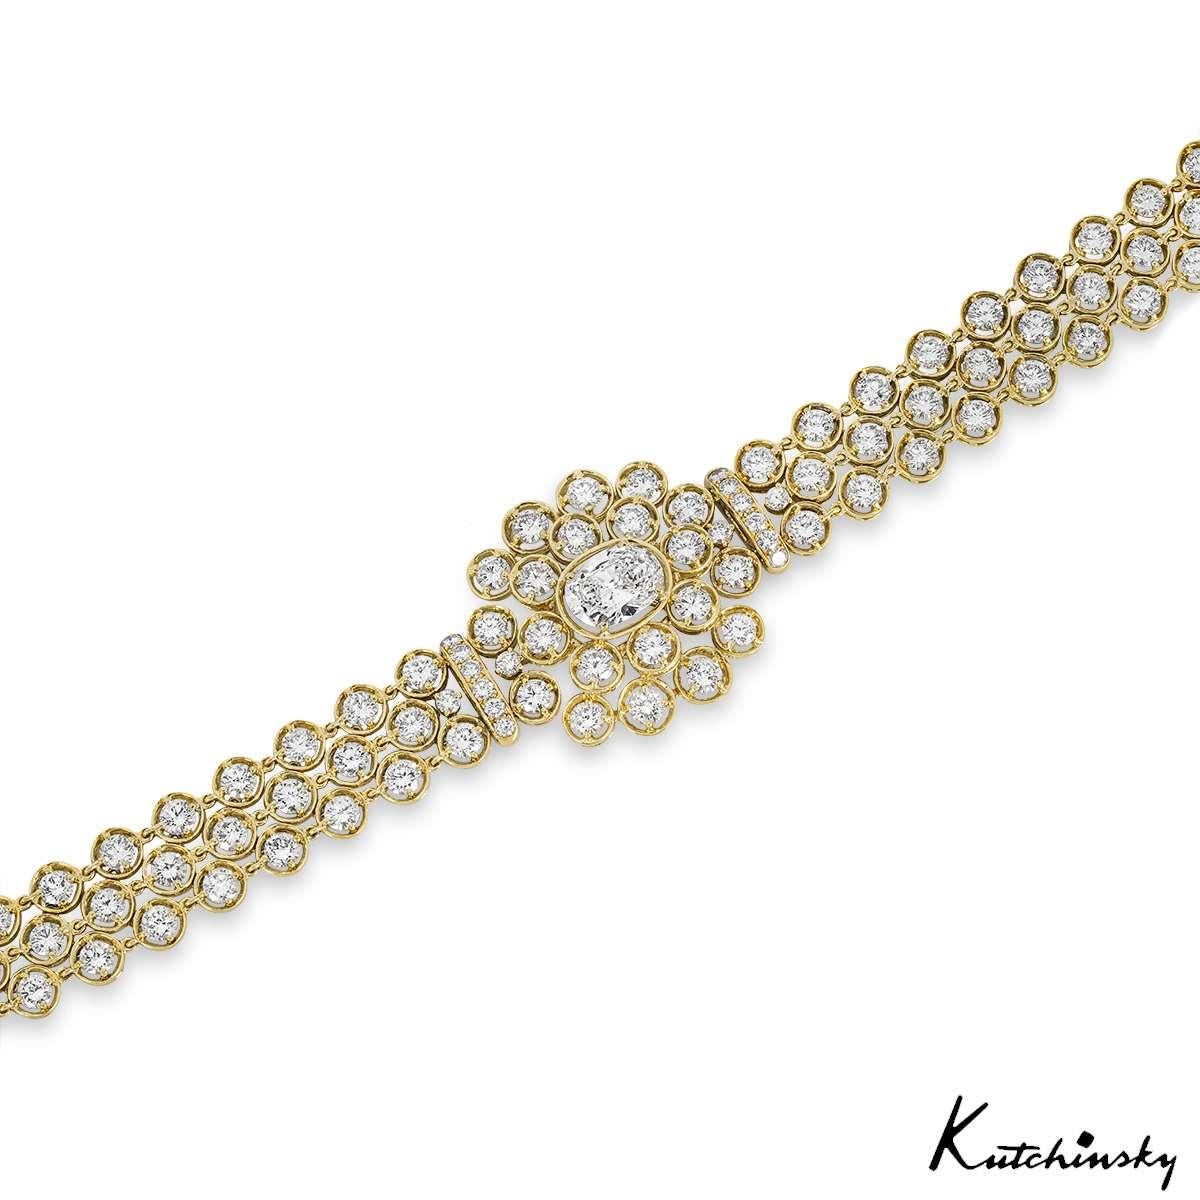 GIA Certified Kutchinsky Yellow Gold Diamond Bracelet 2.72ct E/SI1 In Excellent Condition For Sale In London, GB